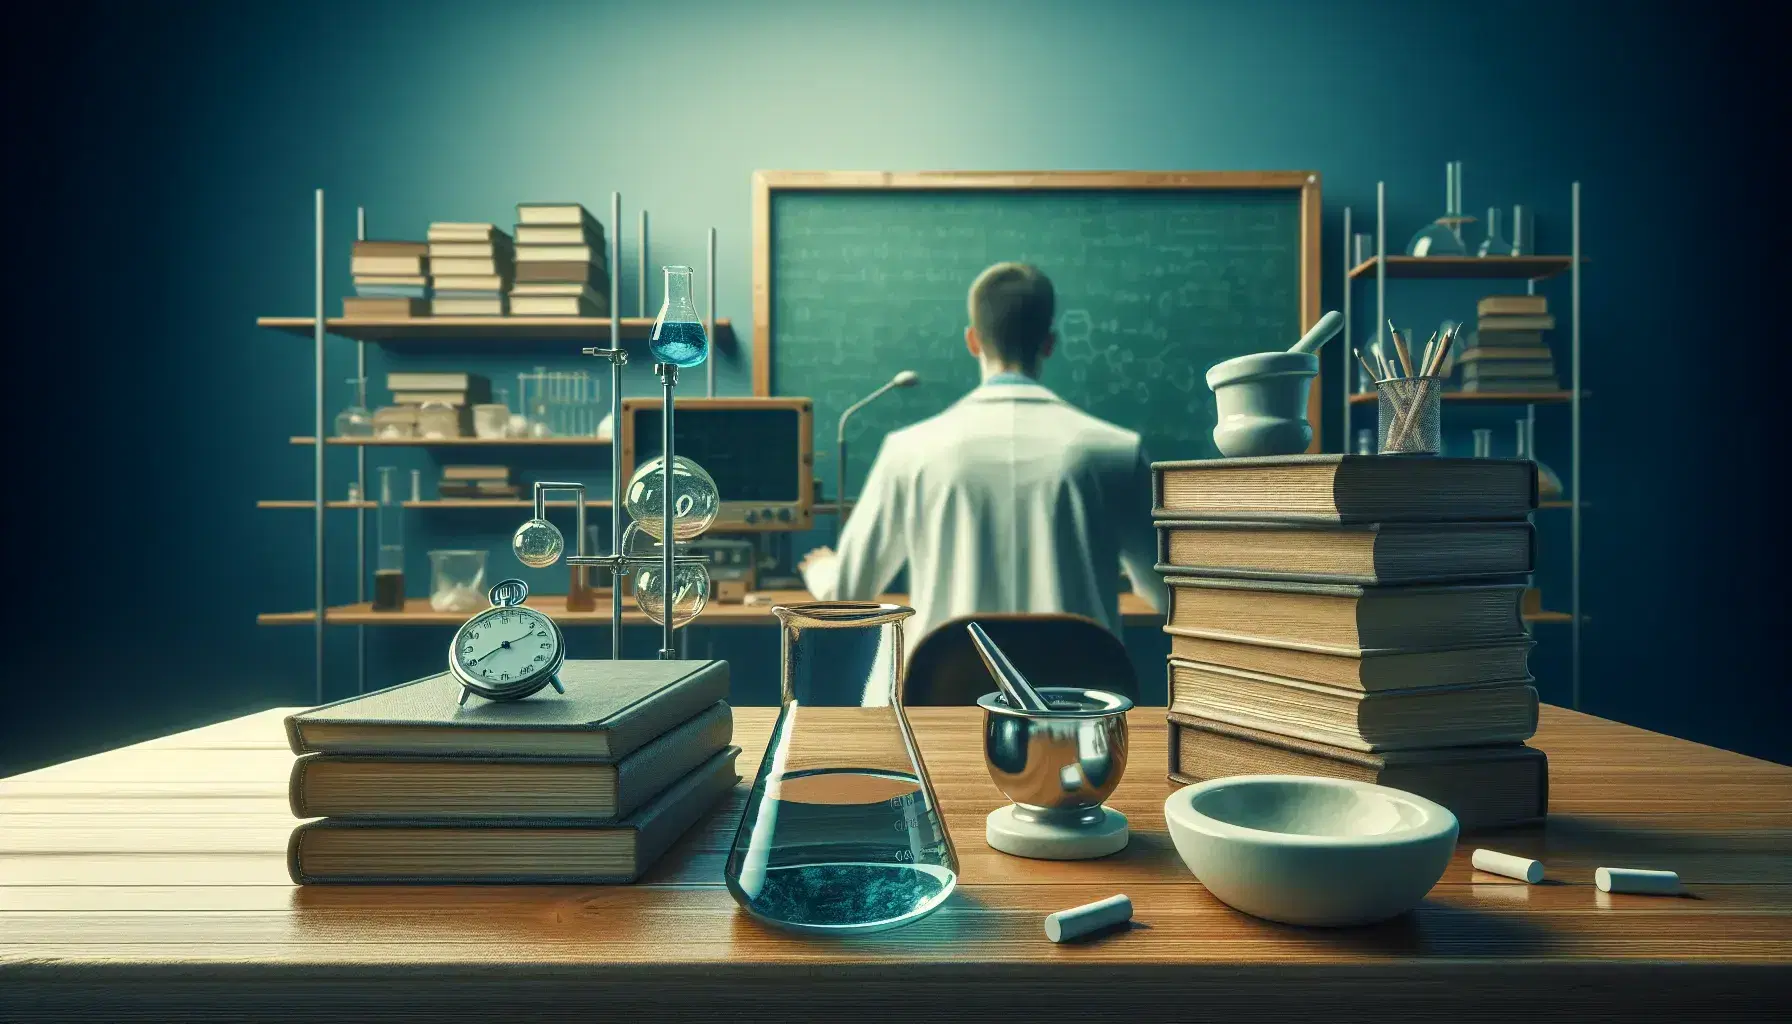 Laboratory scene with a beaker of blue liquid, mortar and pestle, textbooks, stopwatch, and a scientist analyzing data on a computer.